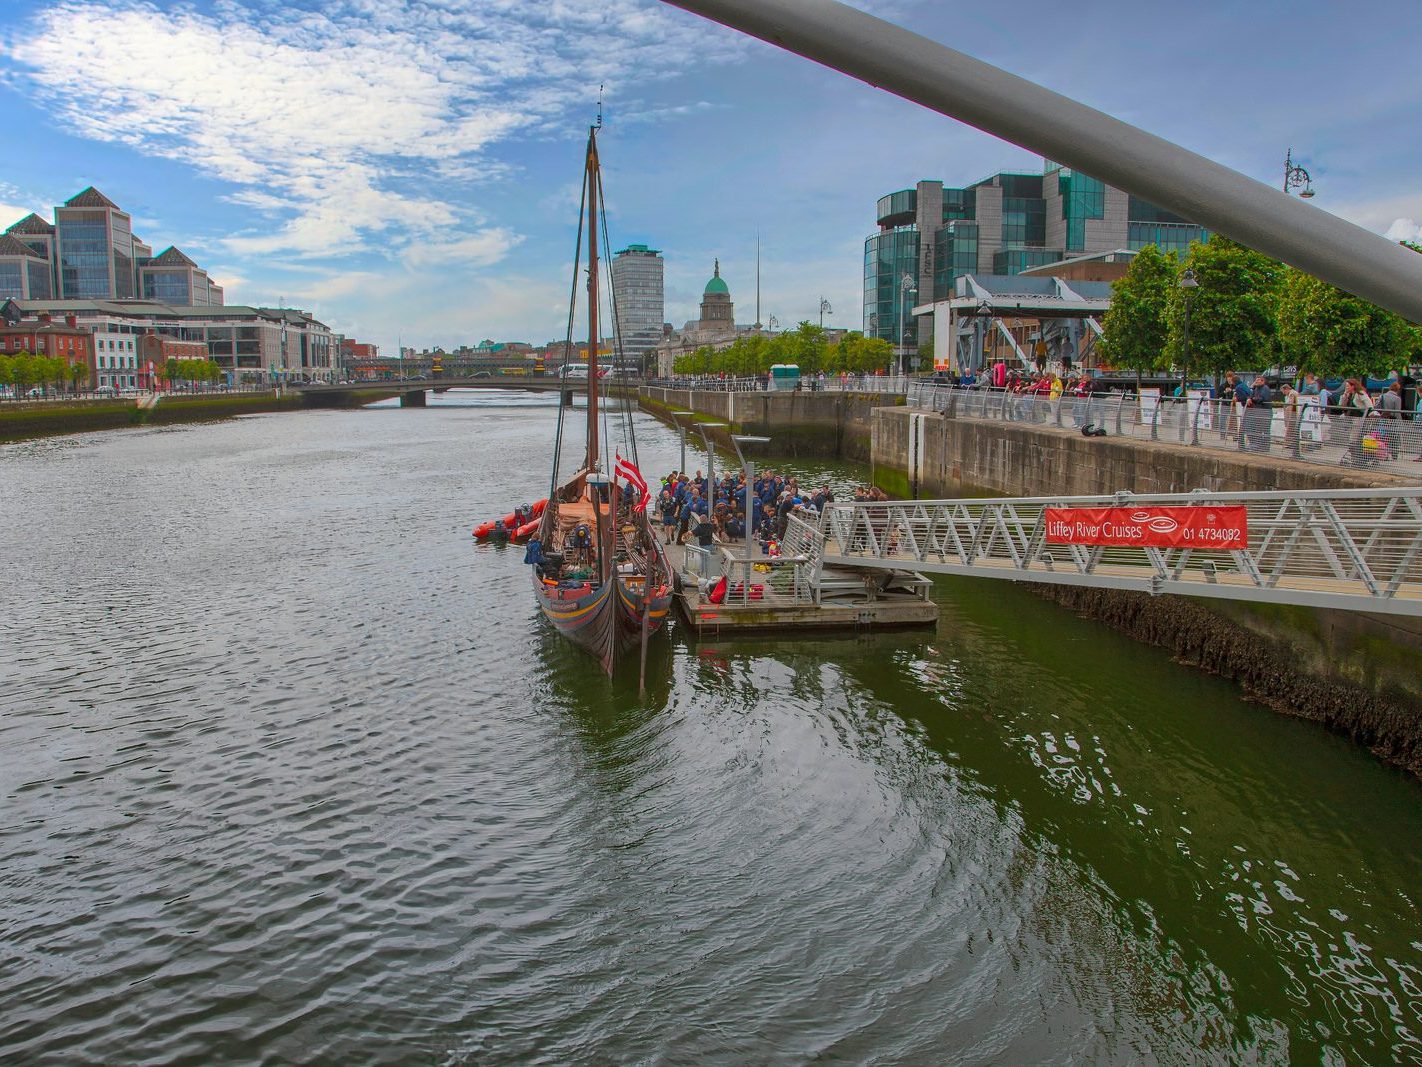 THE SEA STALLION FROM GLEANDALOUGH WAS LIFTED INTO THE LIFFEY USING A LARGE CRANE 004